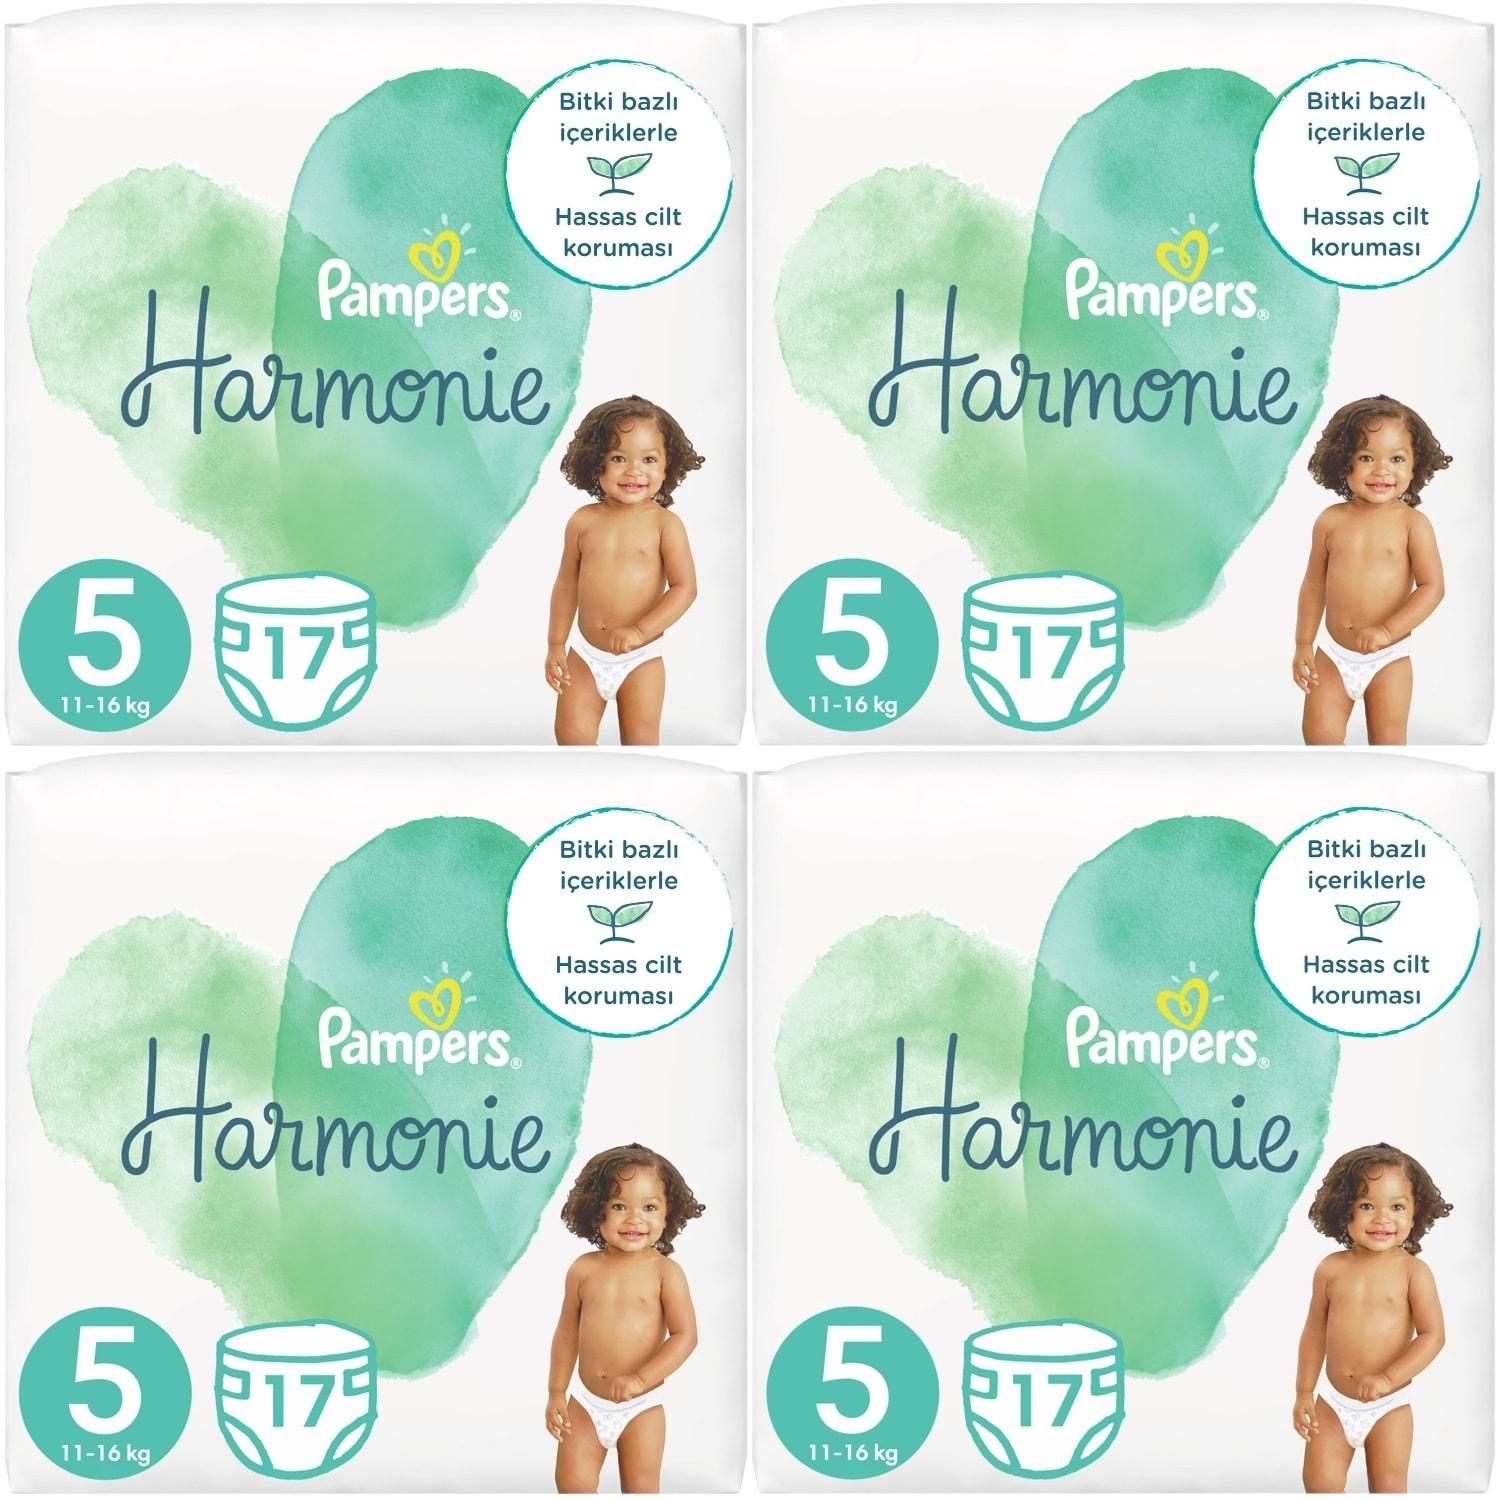 pampers 68